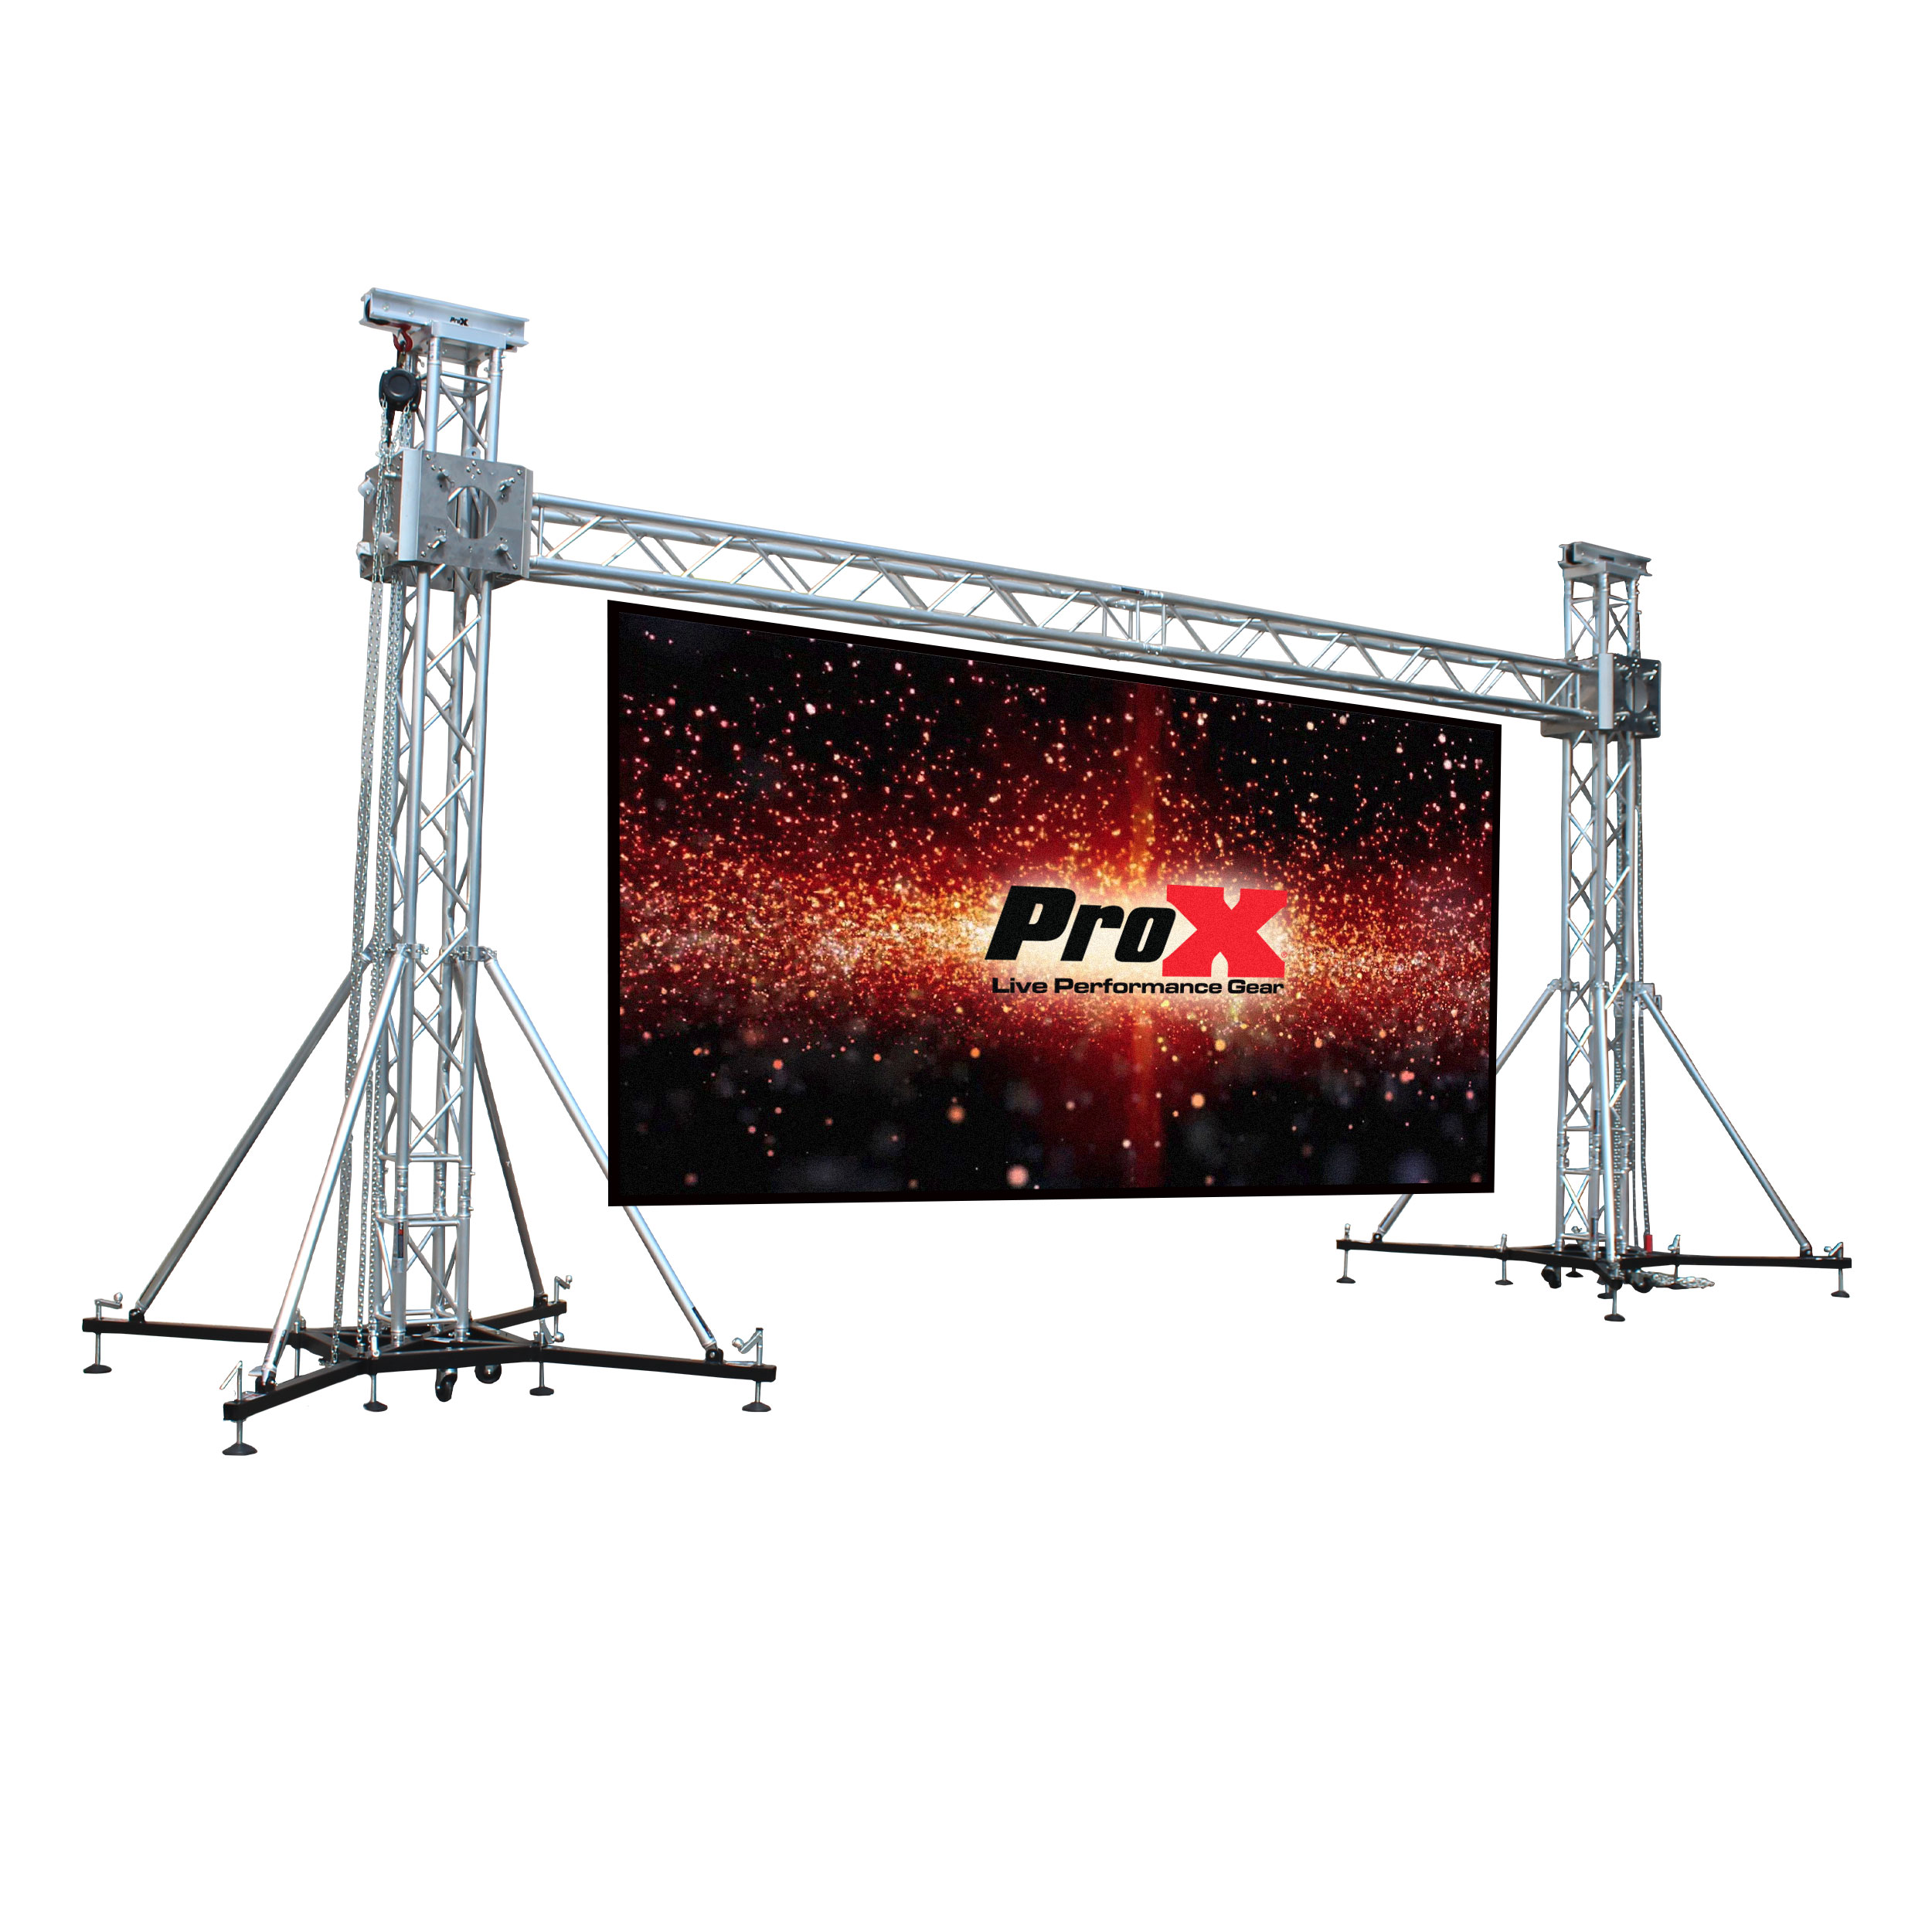 ProX  XTP-GS2023 | LED Video Panel Truss Ground Support System 20'W x 23'H Outdoor w/ Hoist